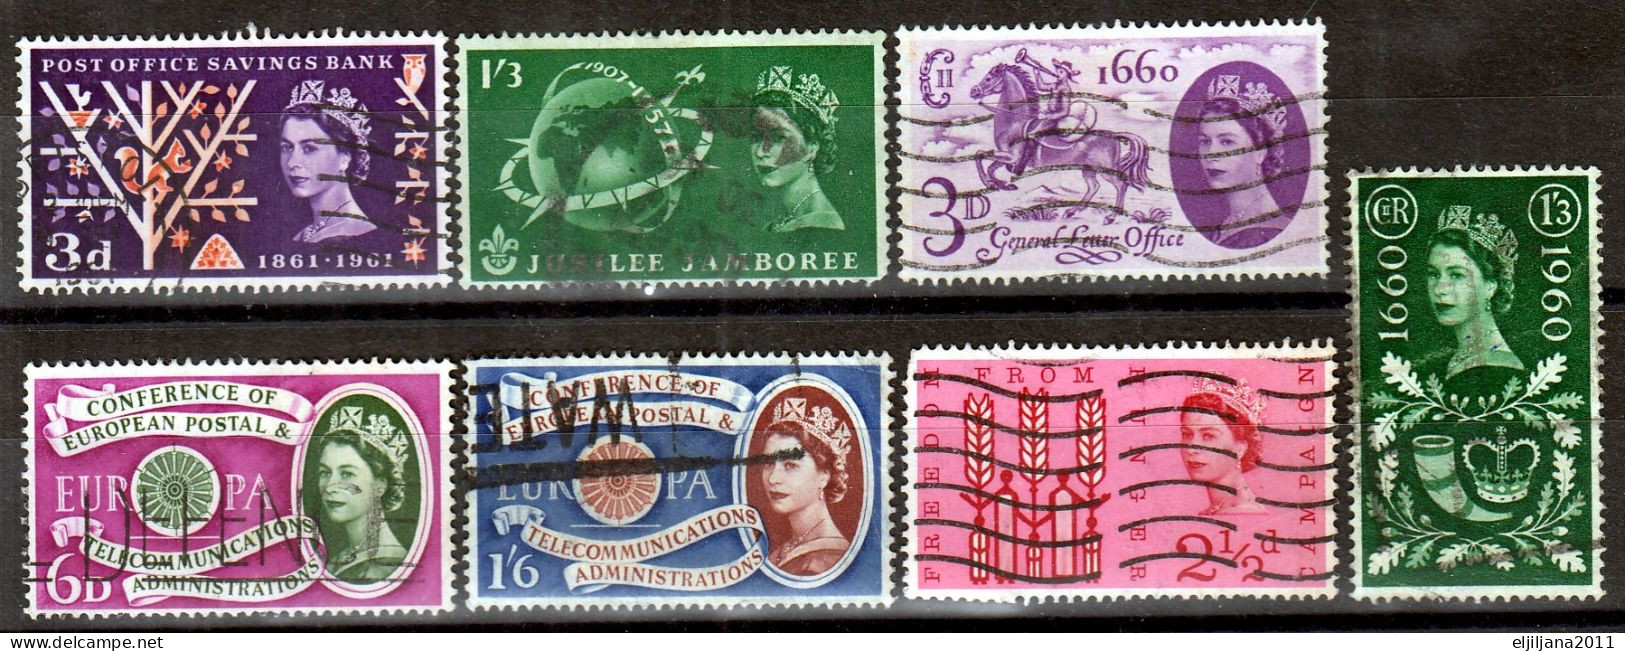 Great Britain - GB / UK / QEII. 1953 - 1963 ⁕ Queen Elizabeth II. ⁕ 22v Used Stamps / Unchecked - Oblitérés